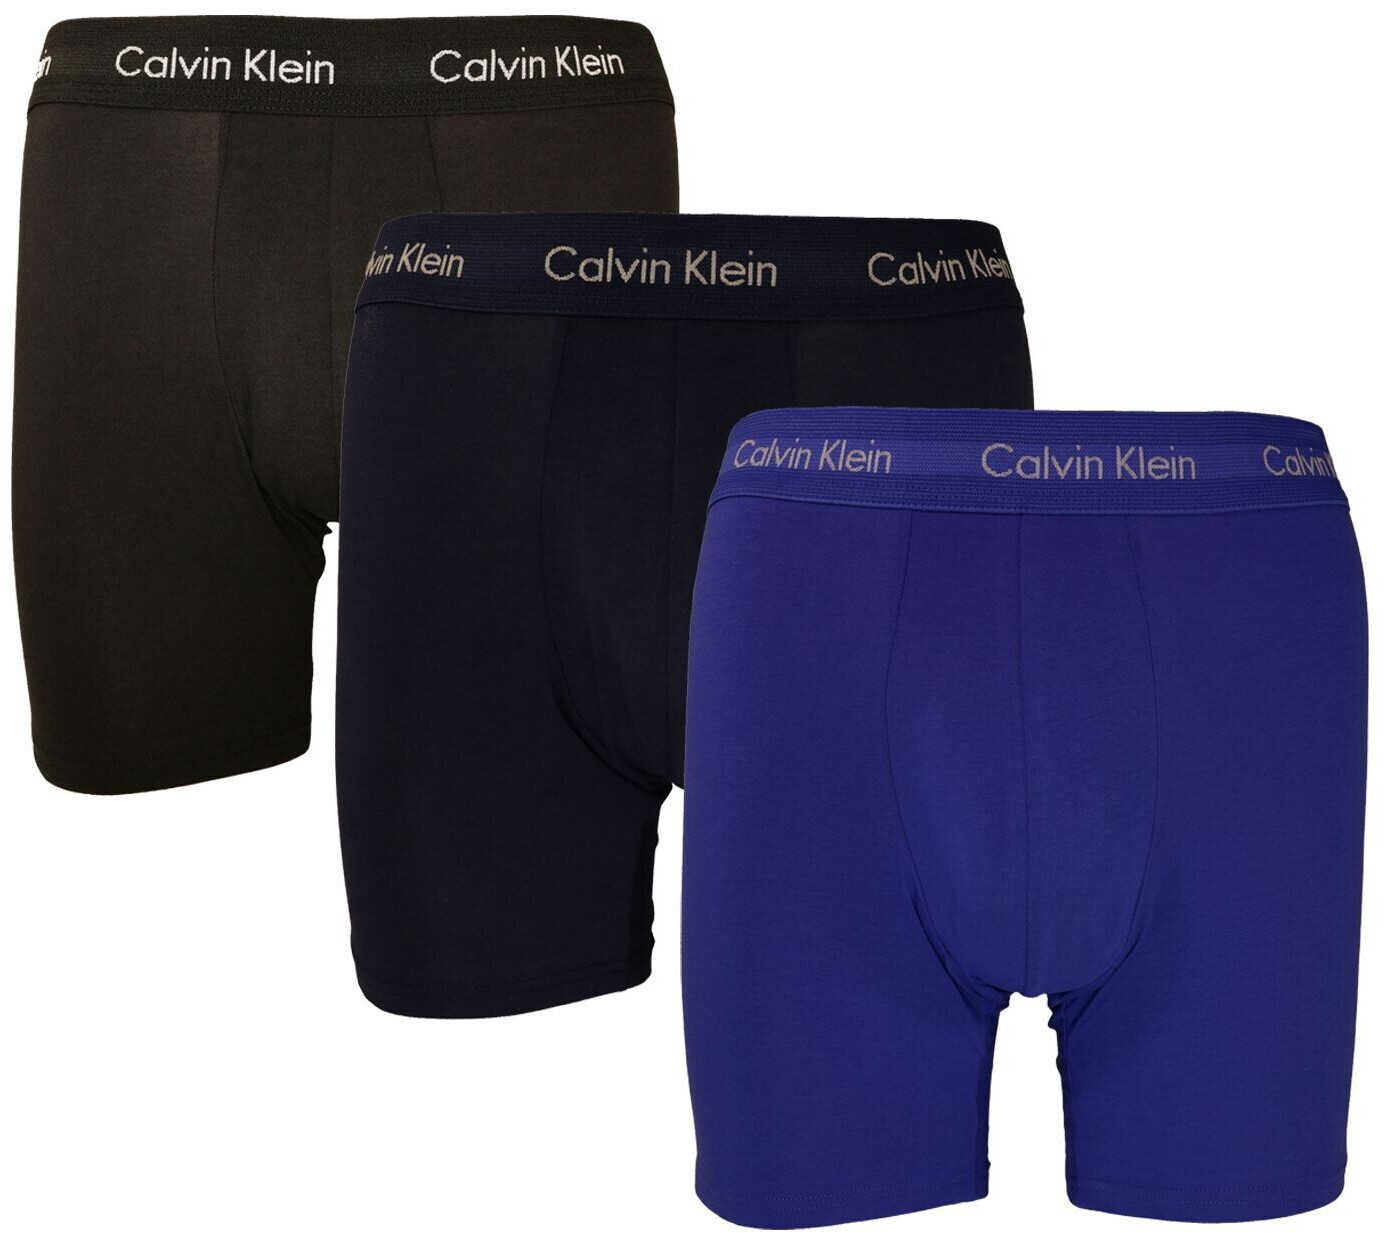 Buy Calvin Klein 3-Pack Boxers - Cotton Stretch (NB1770A-4KU) from £22.93  (Today) – Best Deals on